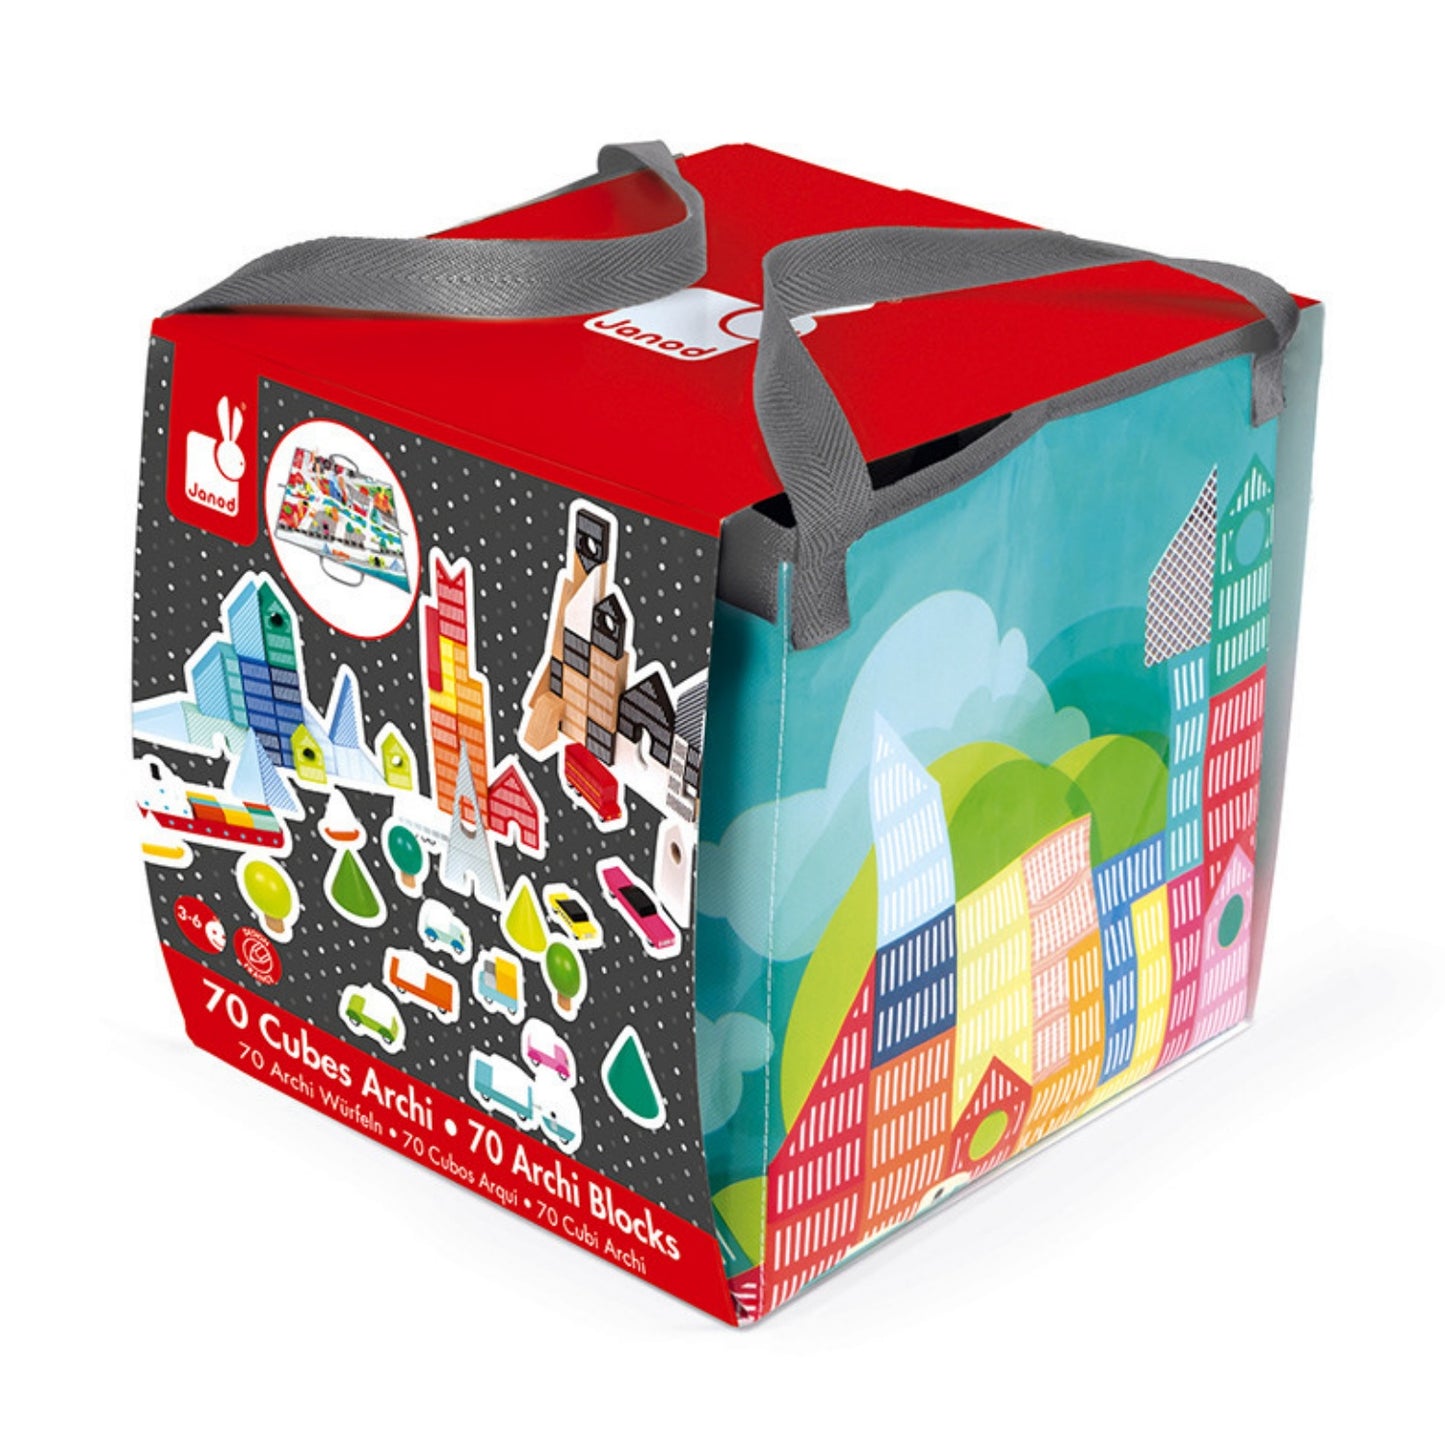 Janod Kubix 70 Archi Blocks | 70 Solid City-Themed Play Blocks & Mat | Packaging | BeoVERDE.ie